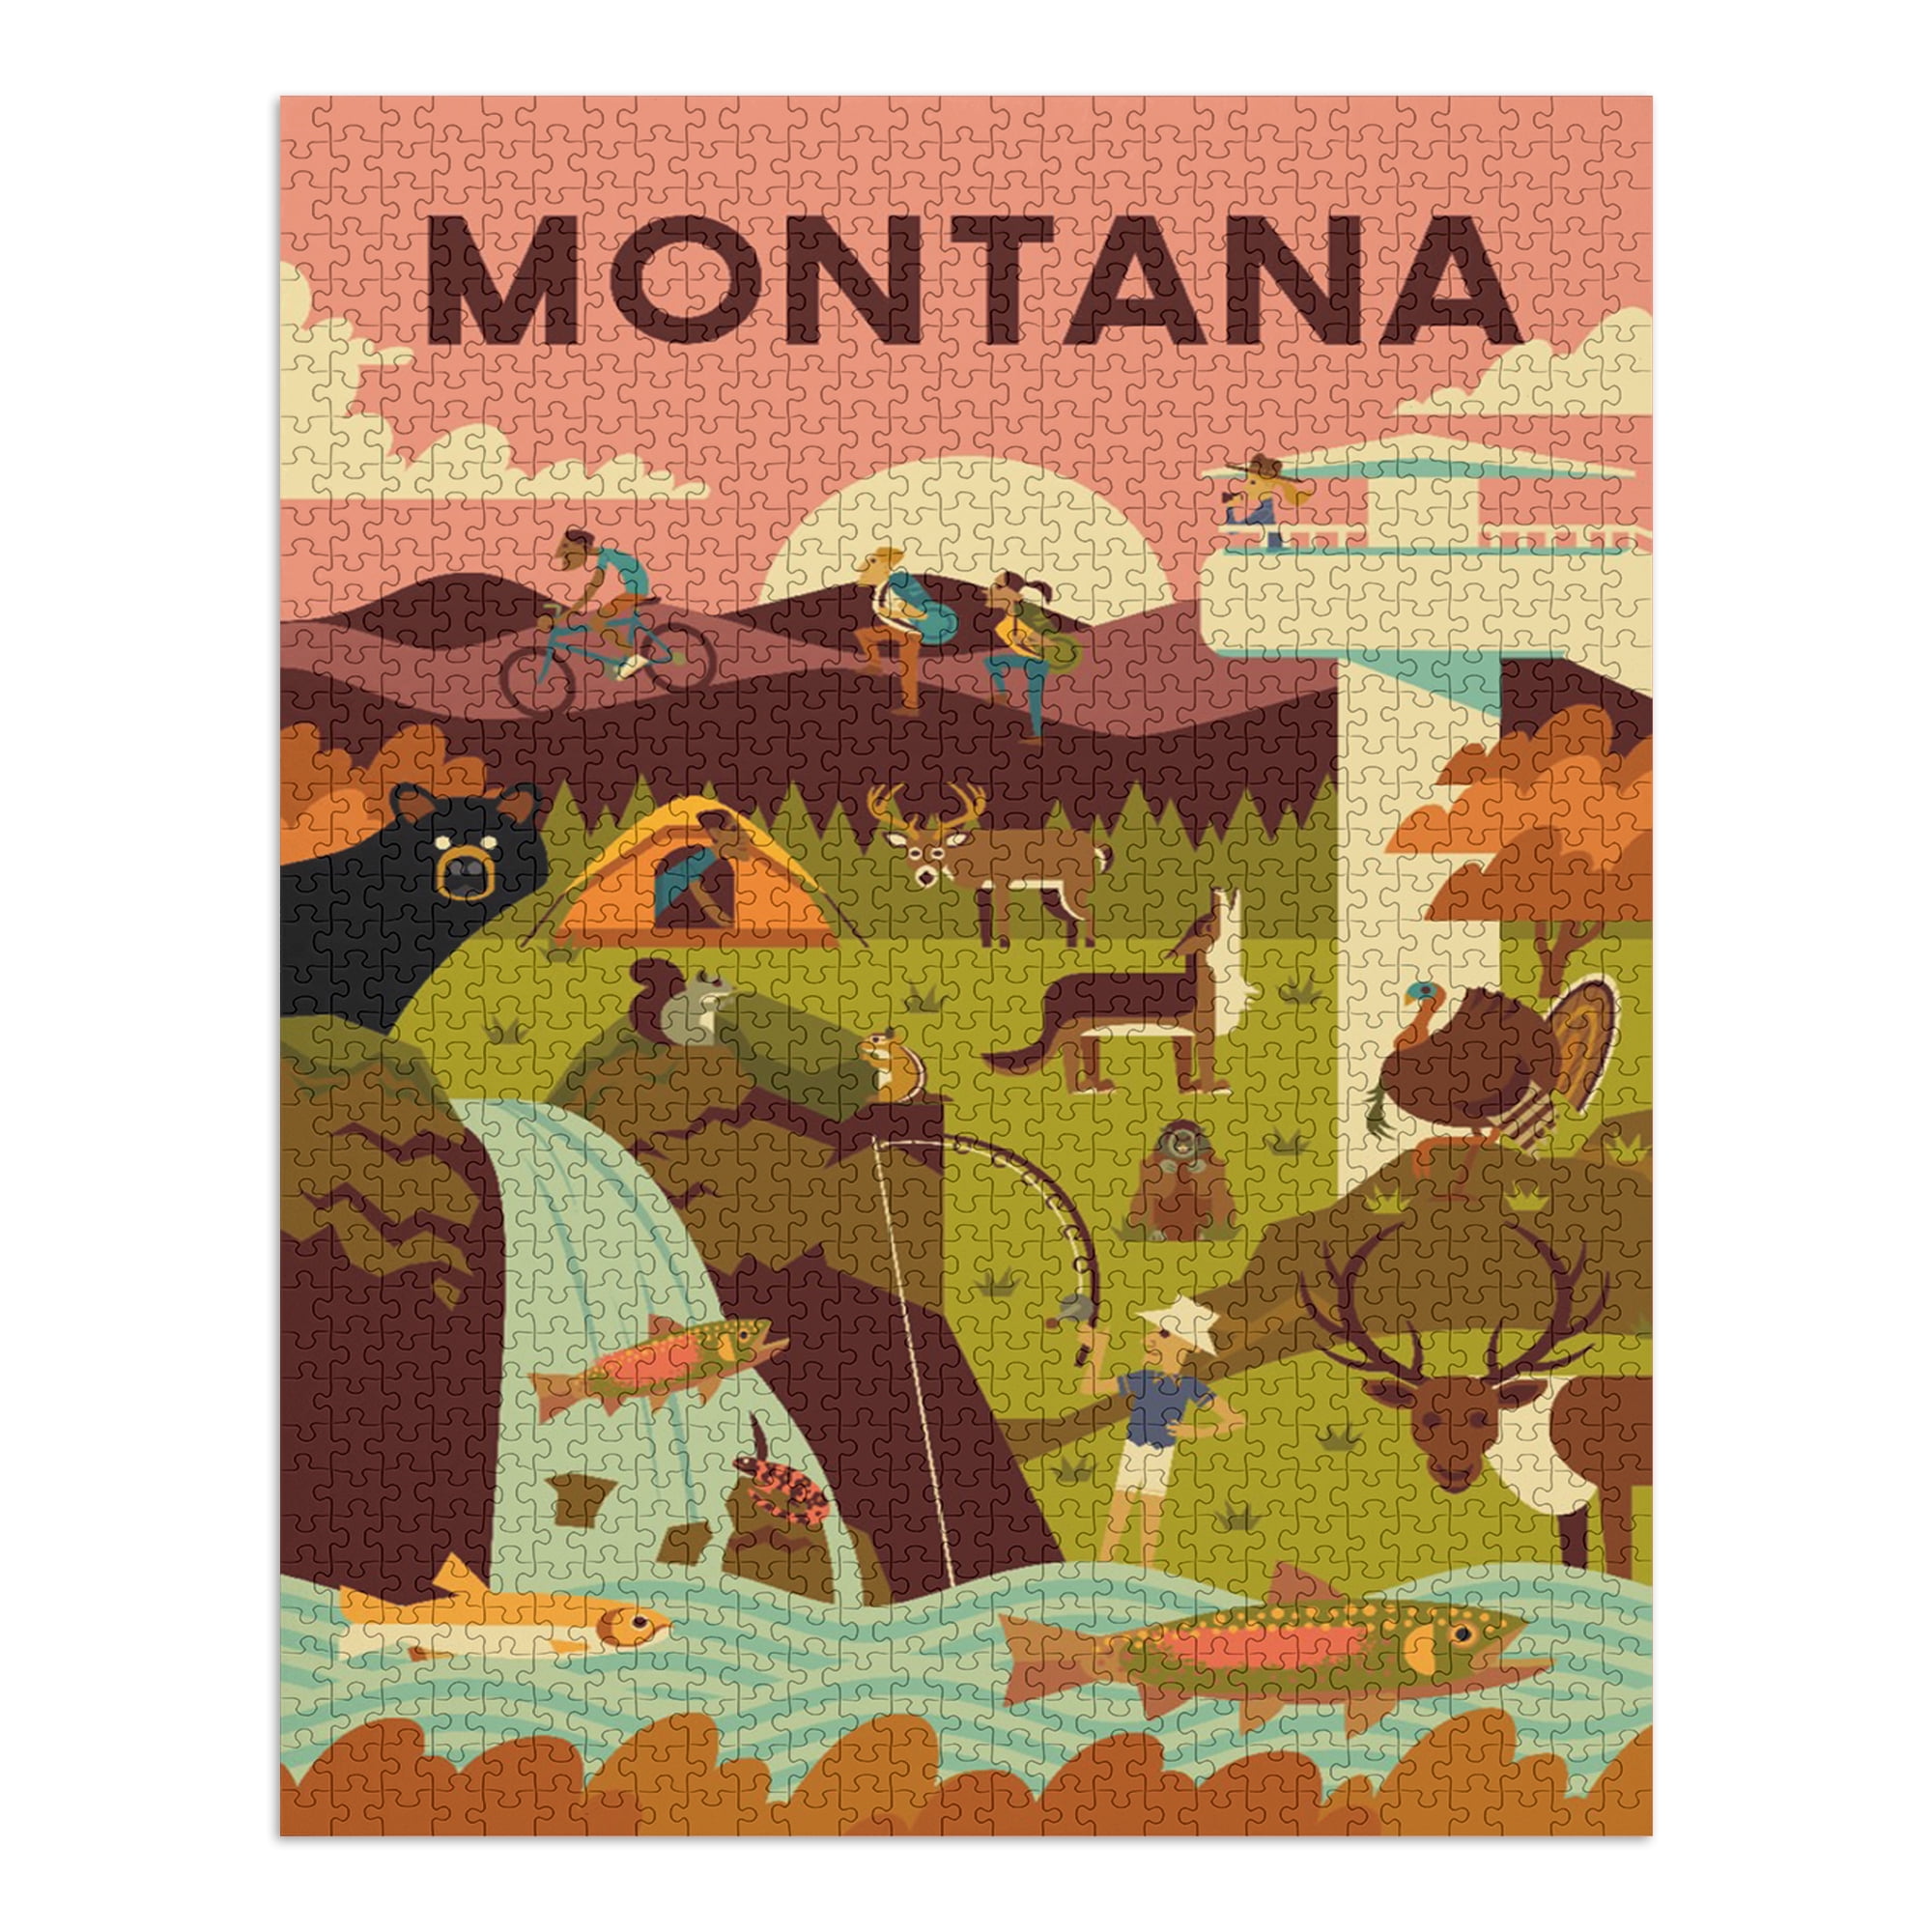 Snowy Range Mountains, Wyoming, Distress Vector Shapes (1000 Piece Puzzle,  Size 19x27, Challenging Jigsaw Puzzle for Adults and Family, Made in USA)